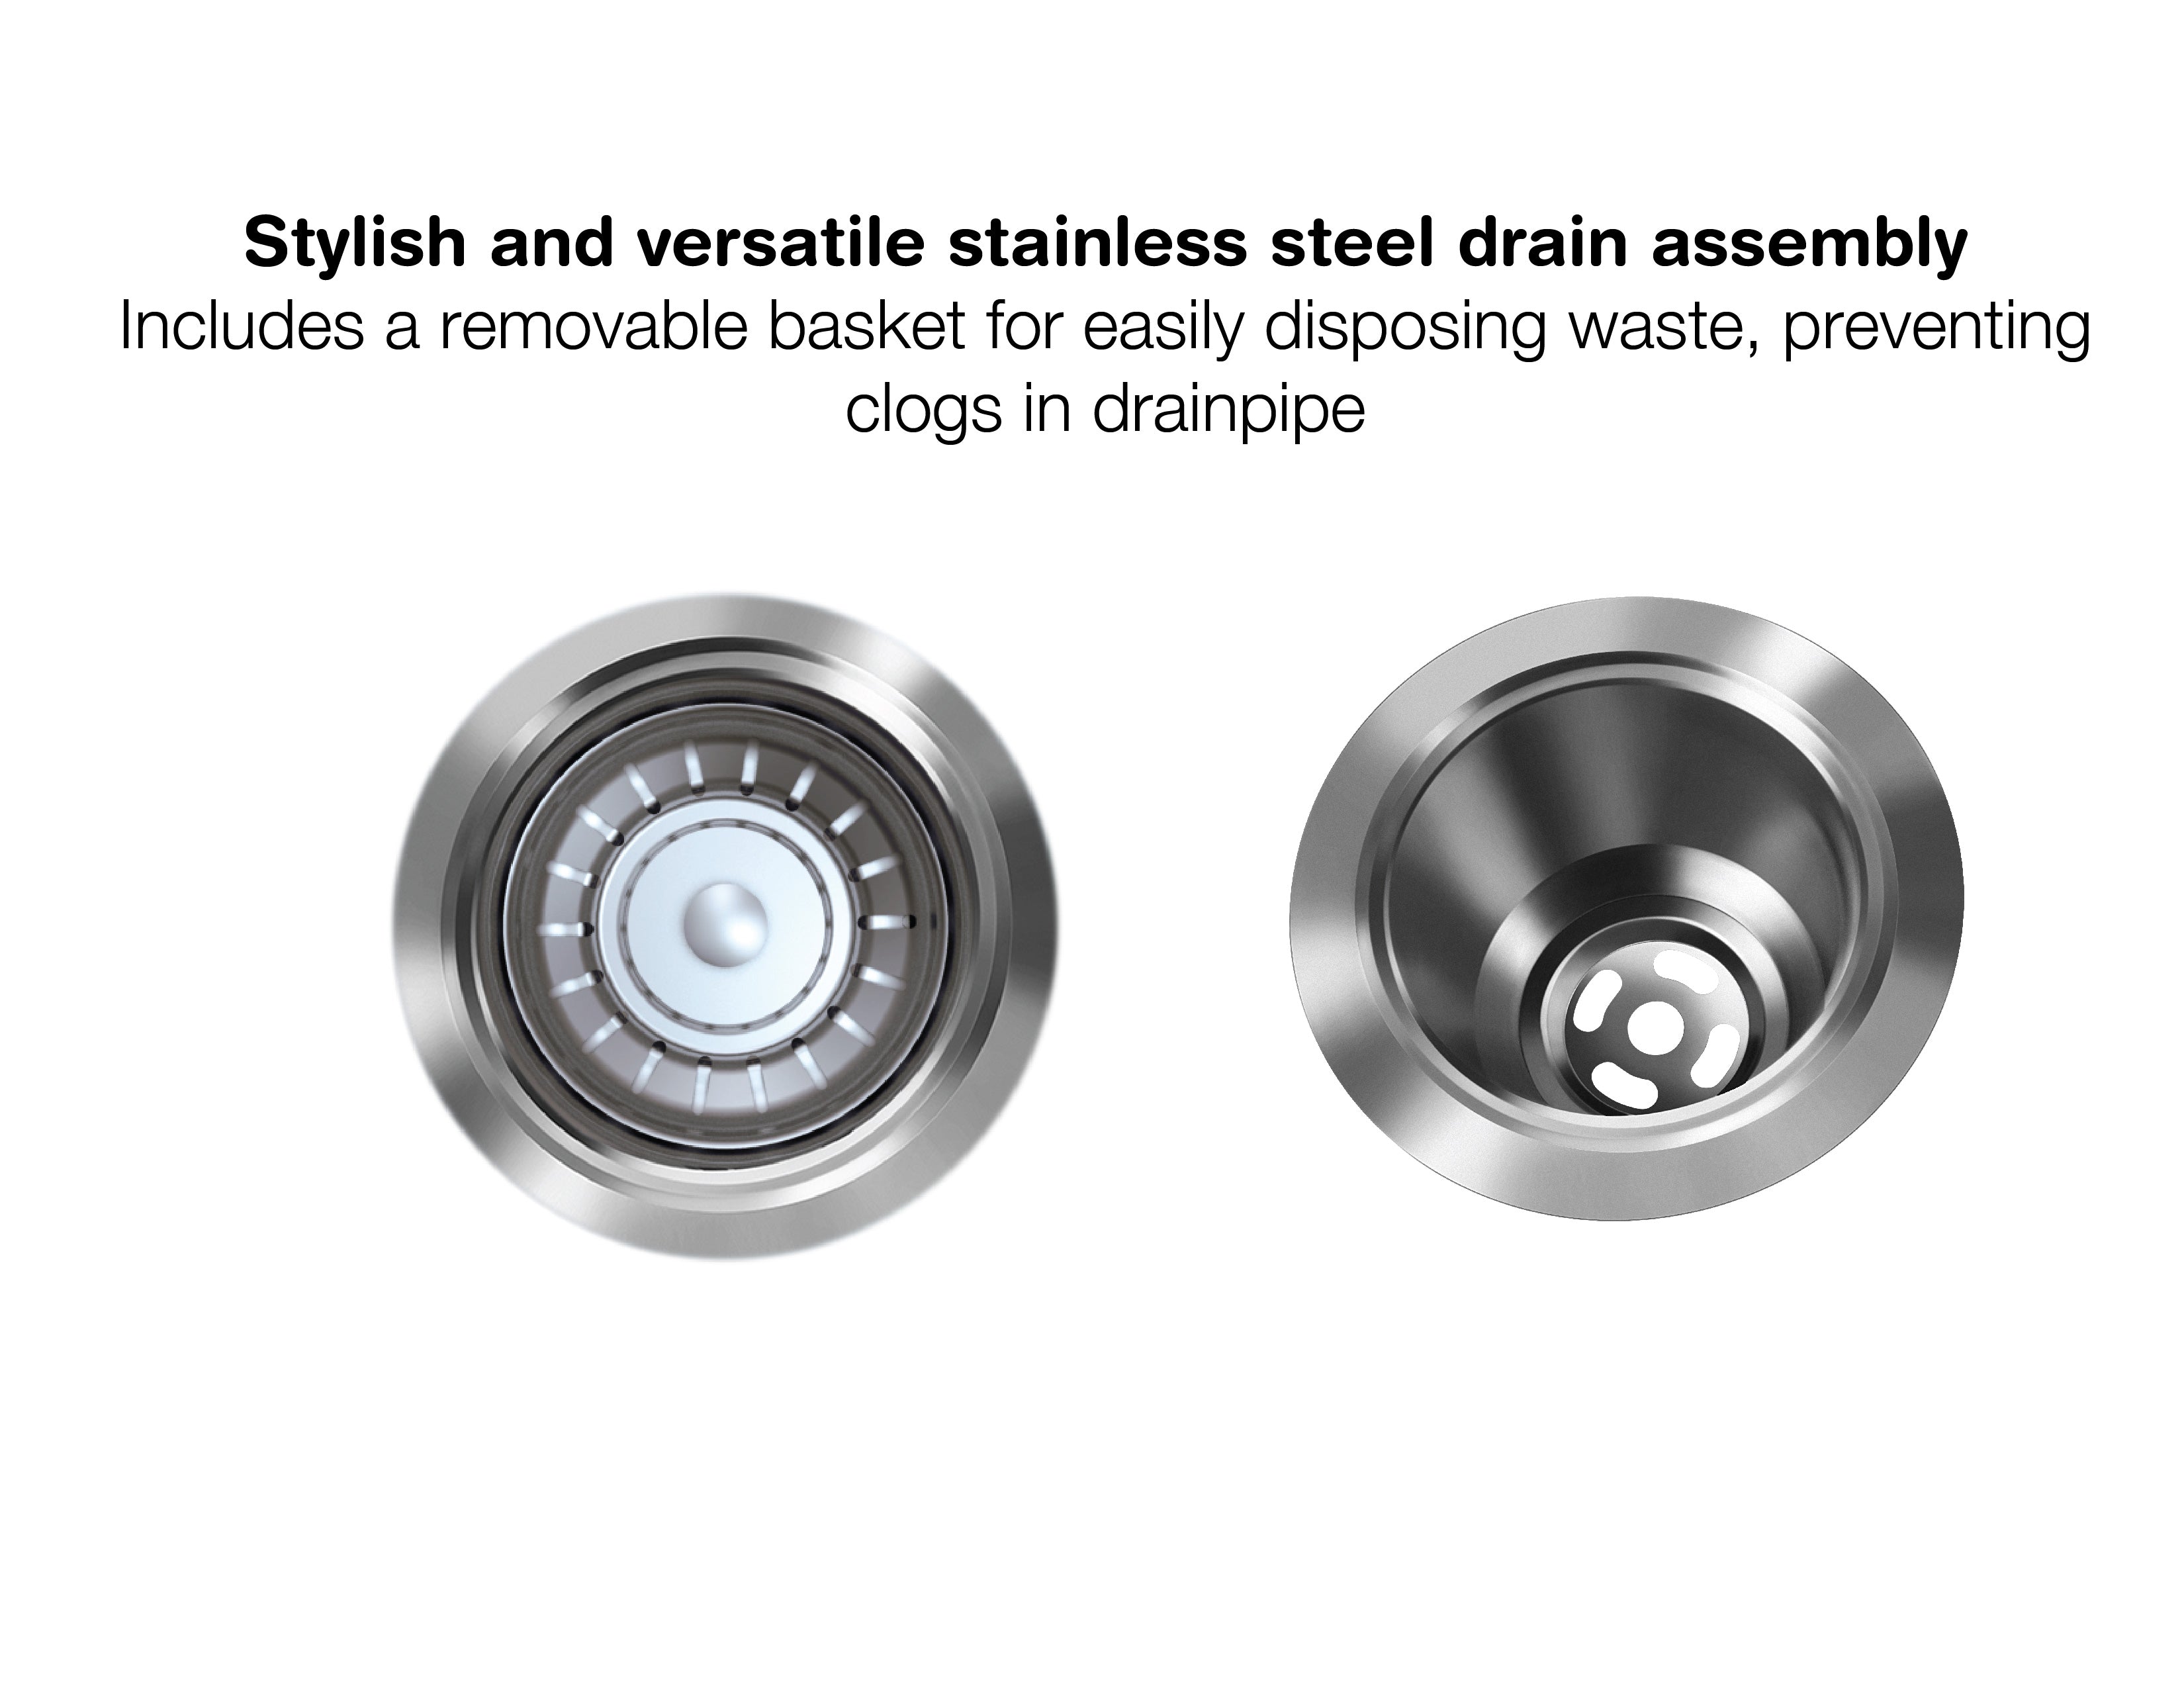 Capri Series Undermount Stainless Steel 23 in. Single Bowl Kitchen Sink in Satin Finish with Strainer